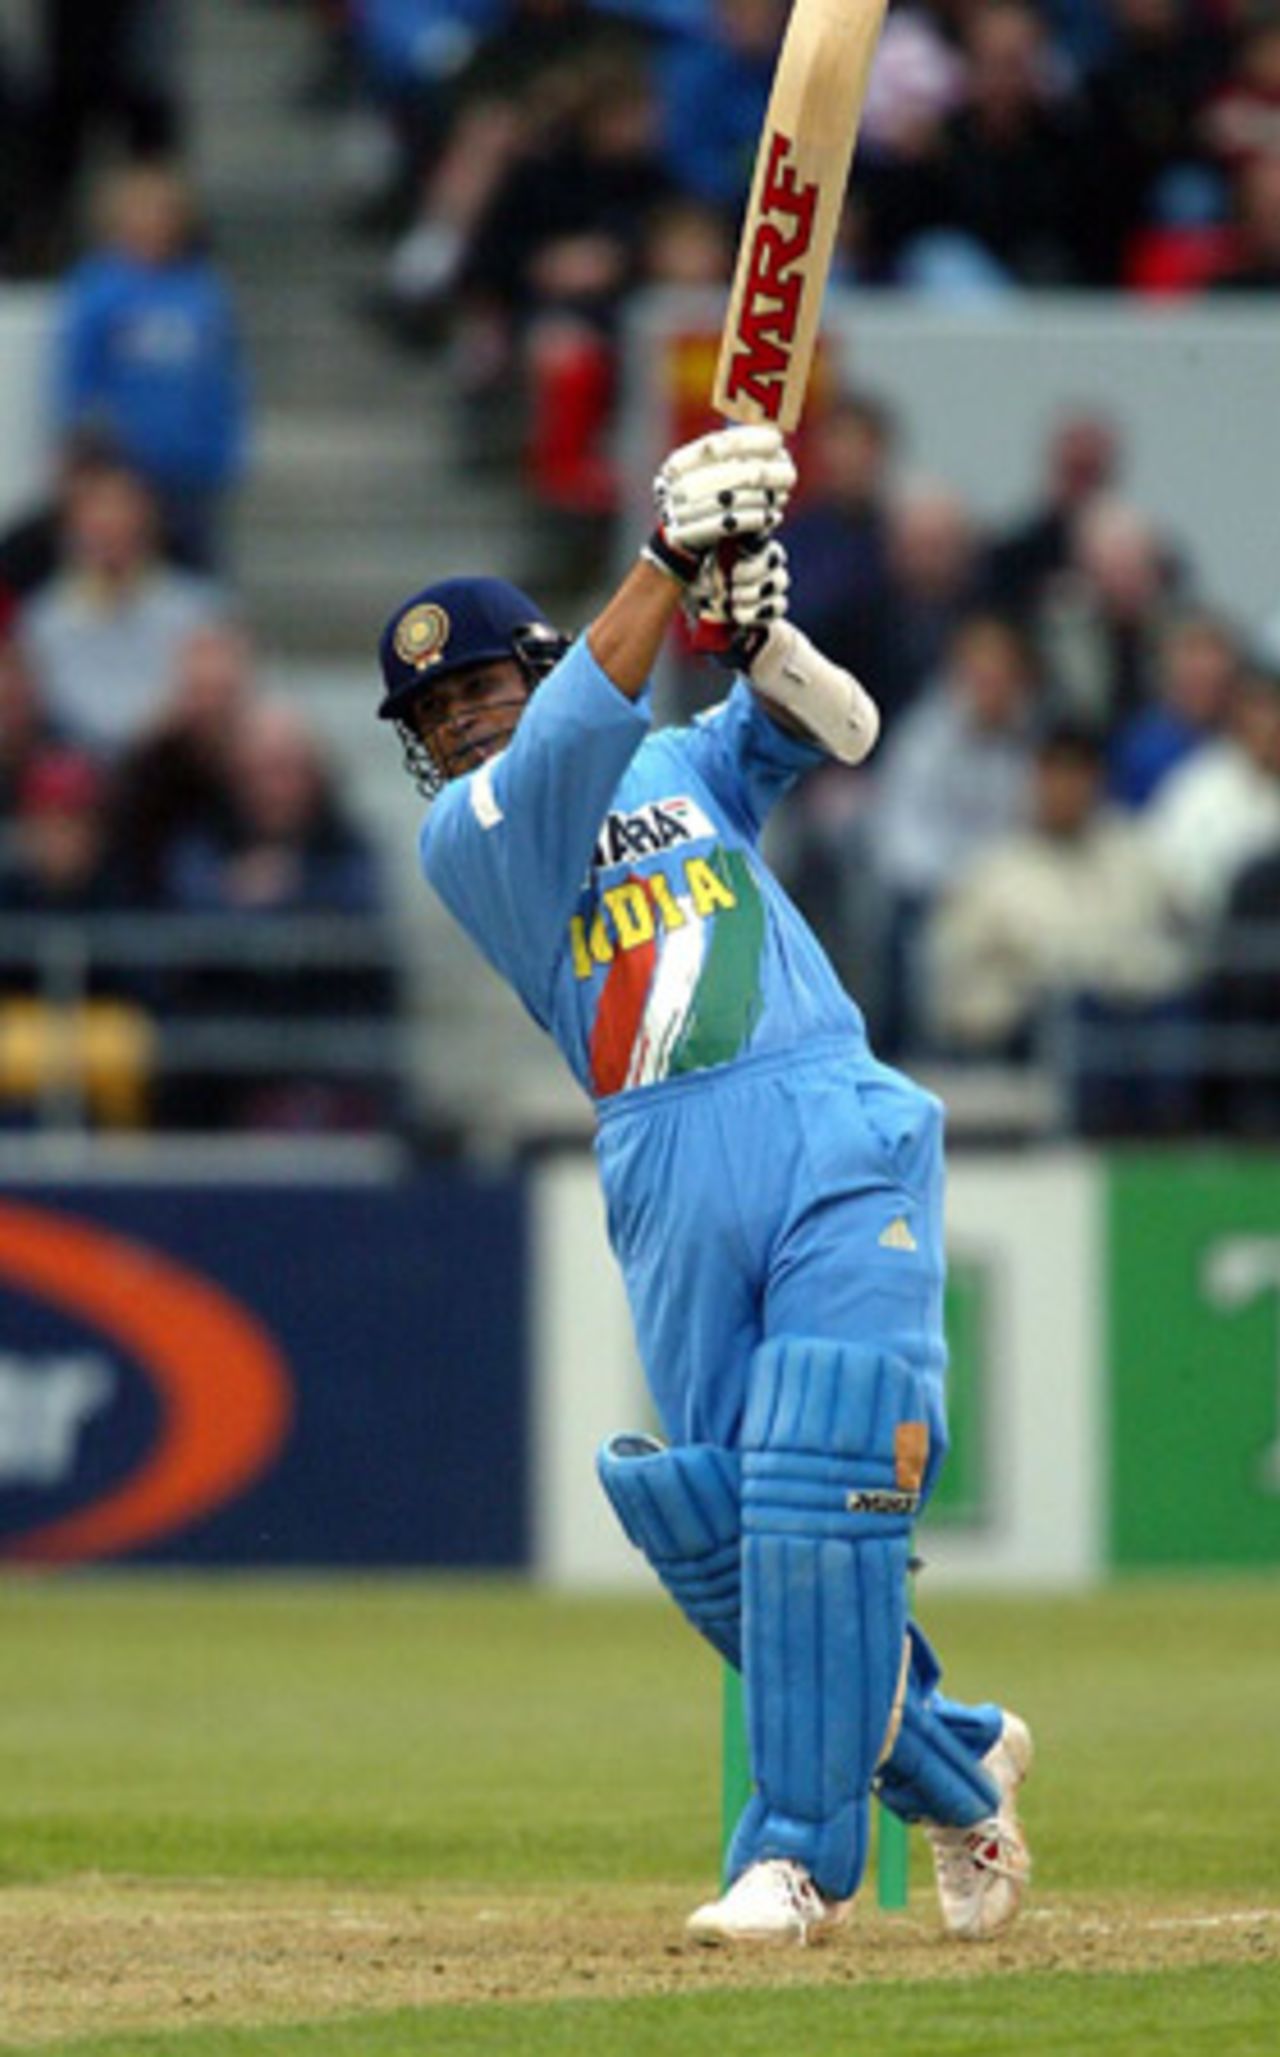 Indian batsman Tendulkar lofts a delivery down the ground during his first innings of 72. Super Max International: New Zealand v India at Jade Stadium, Christchurch, 4 December 2002.